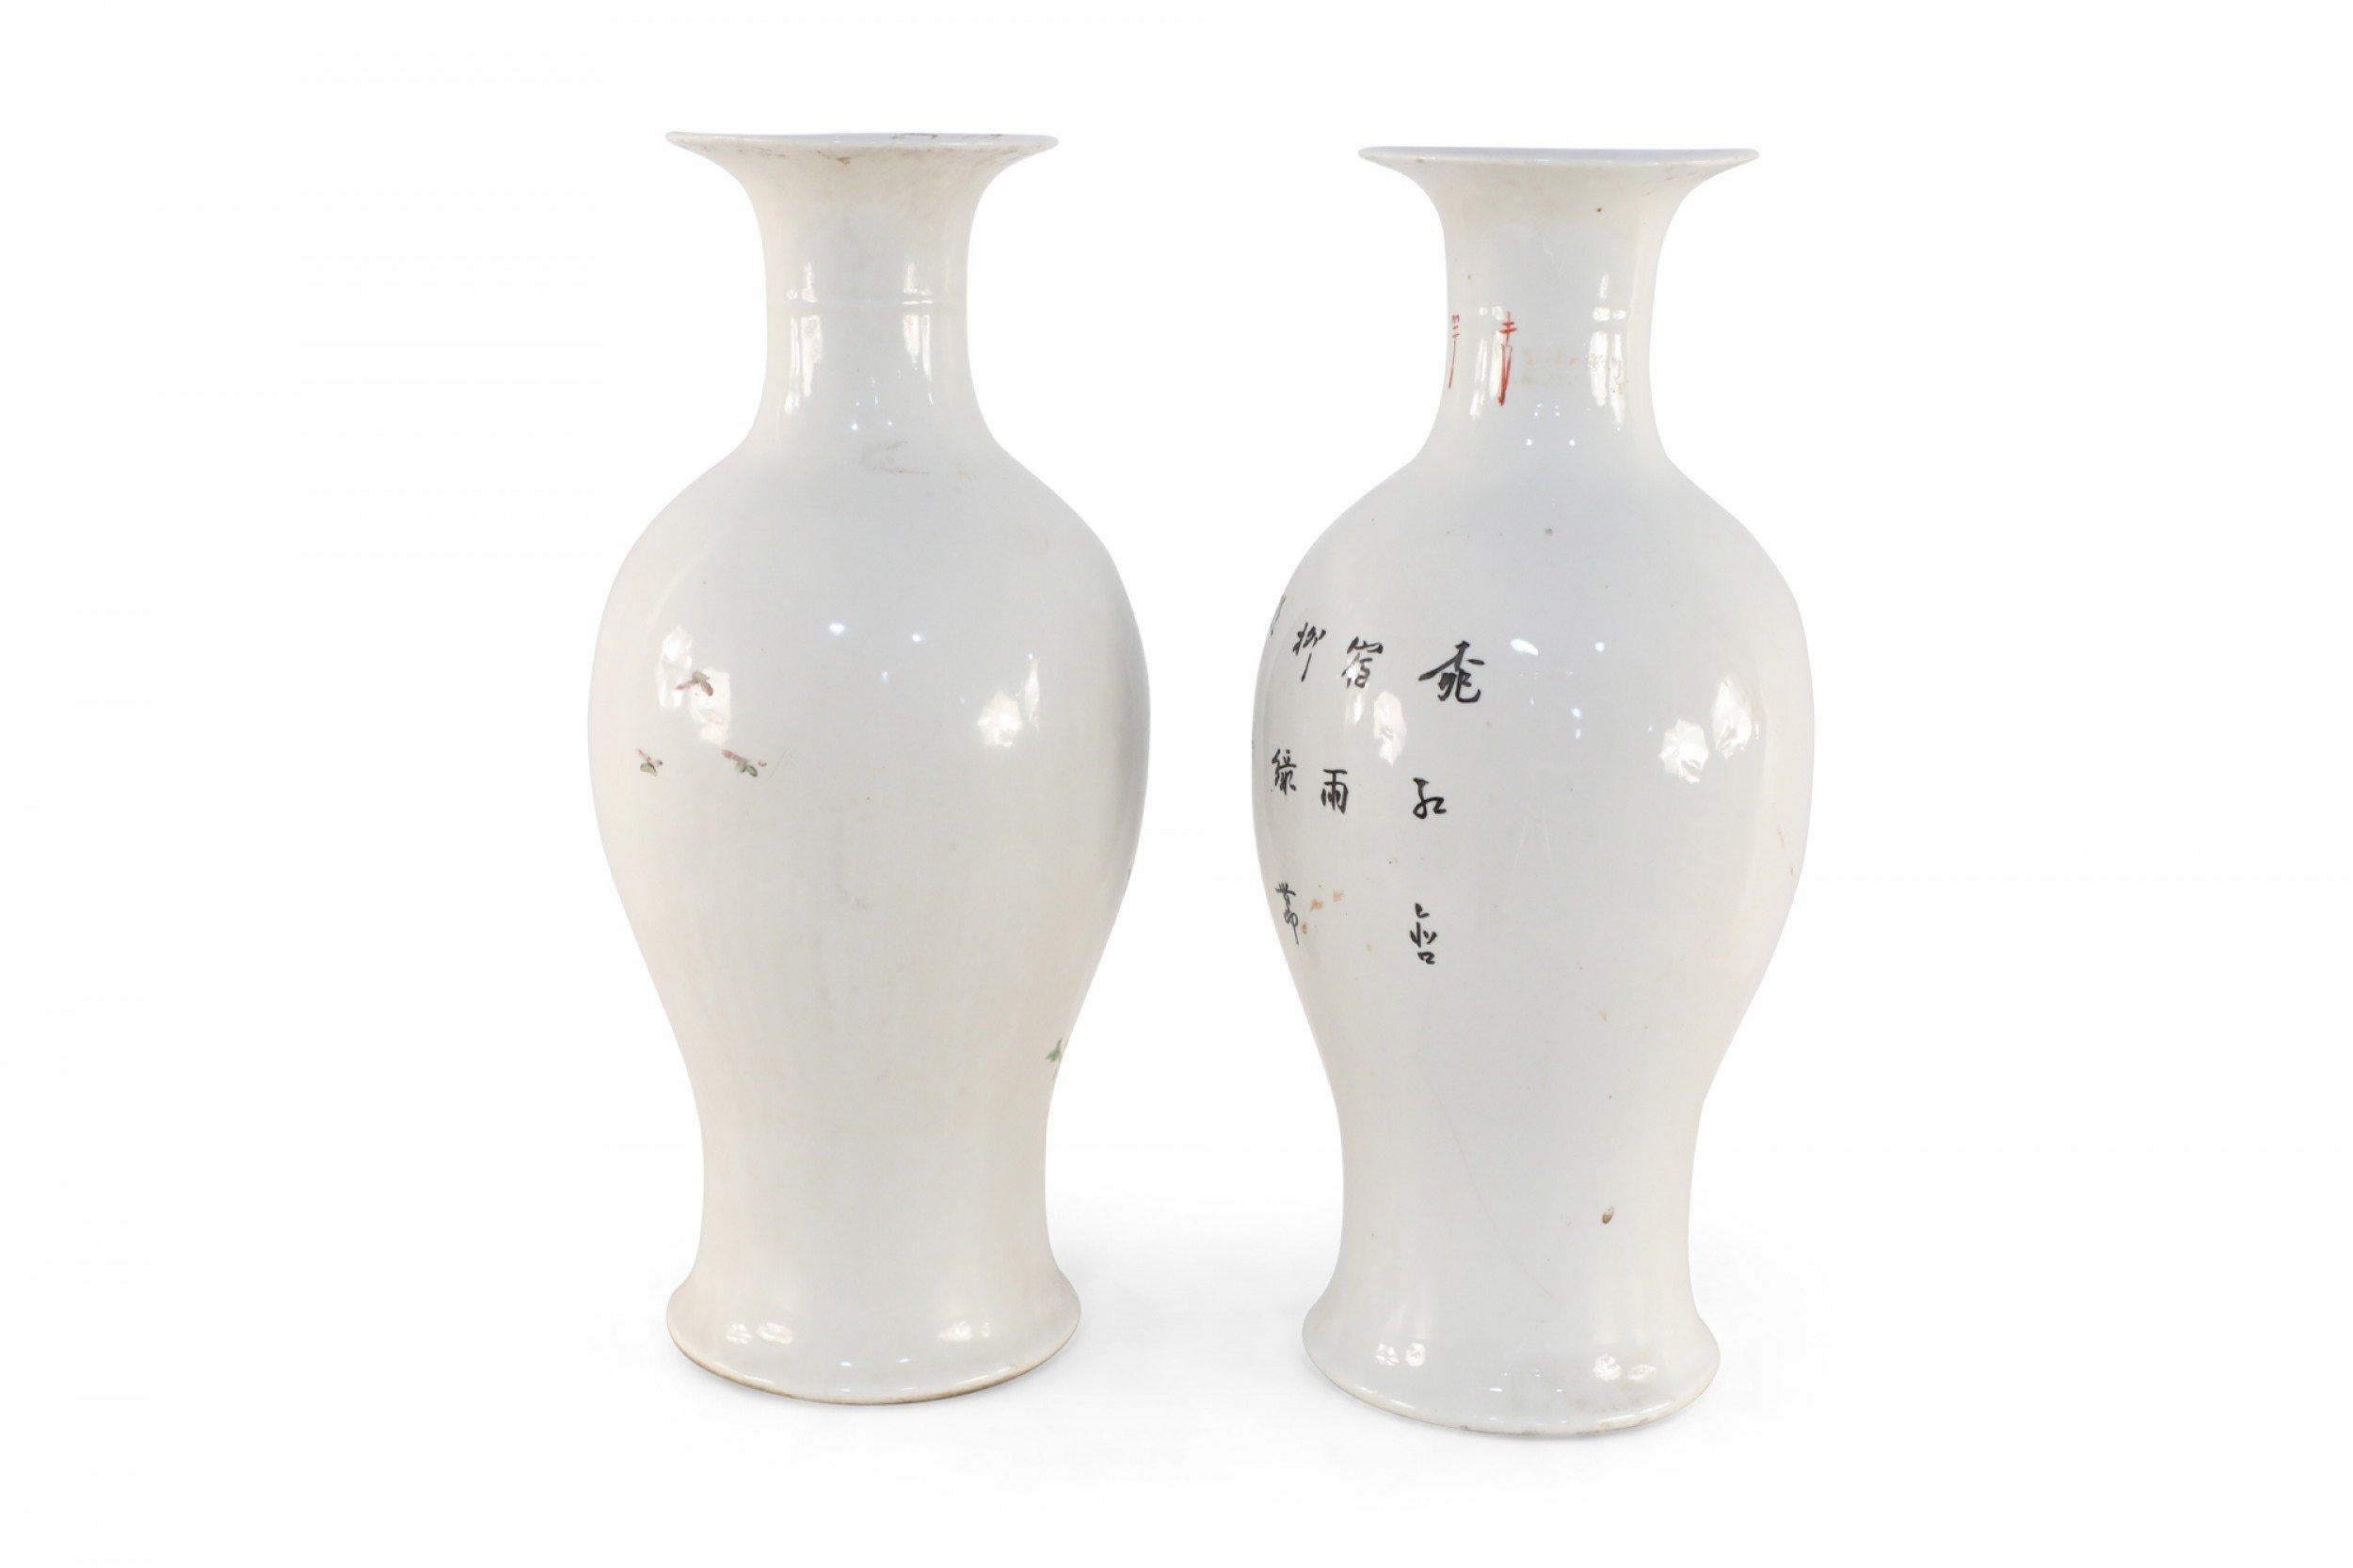 Pair of similar Chinese white porcelain urns depicting small yellow birds in cherry blossom branches on the fronts, and characters on the reverse sides (vases vary slightly in color and pattern) (priced as pair).
   